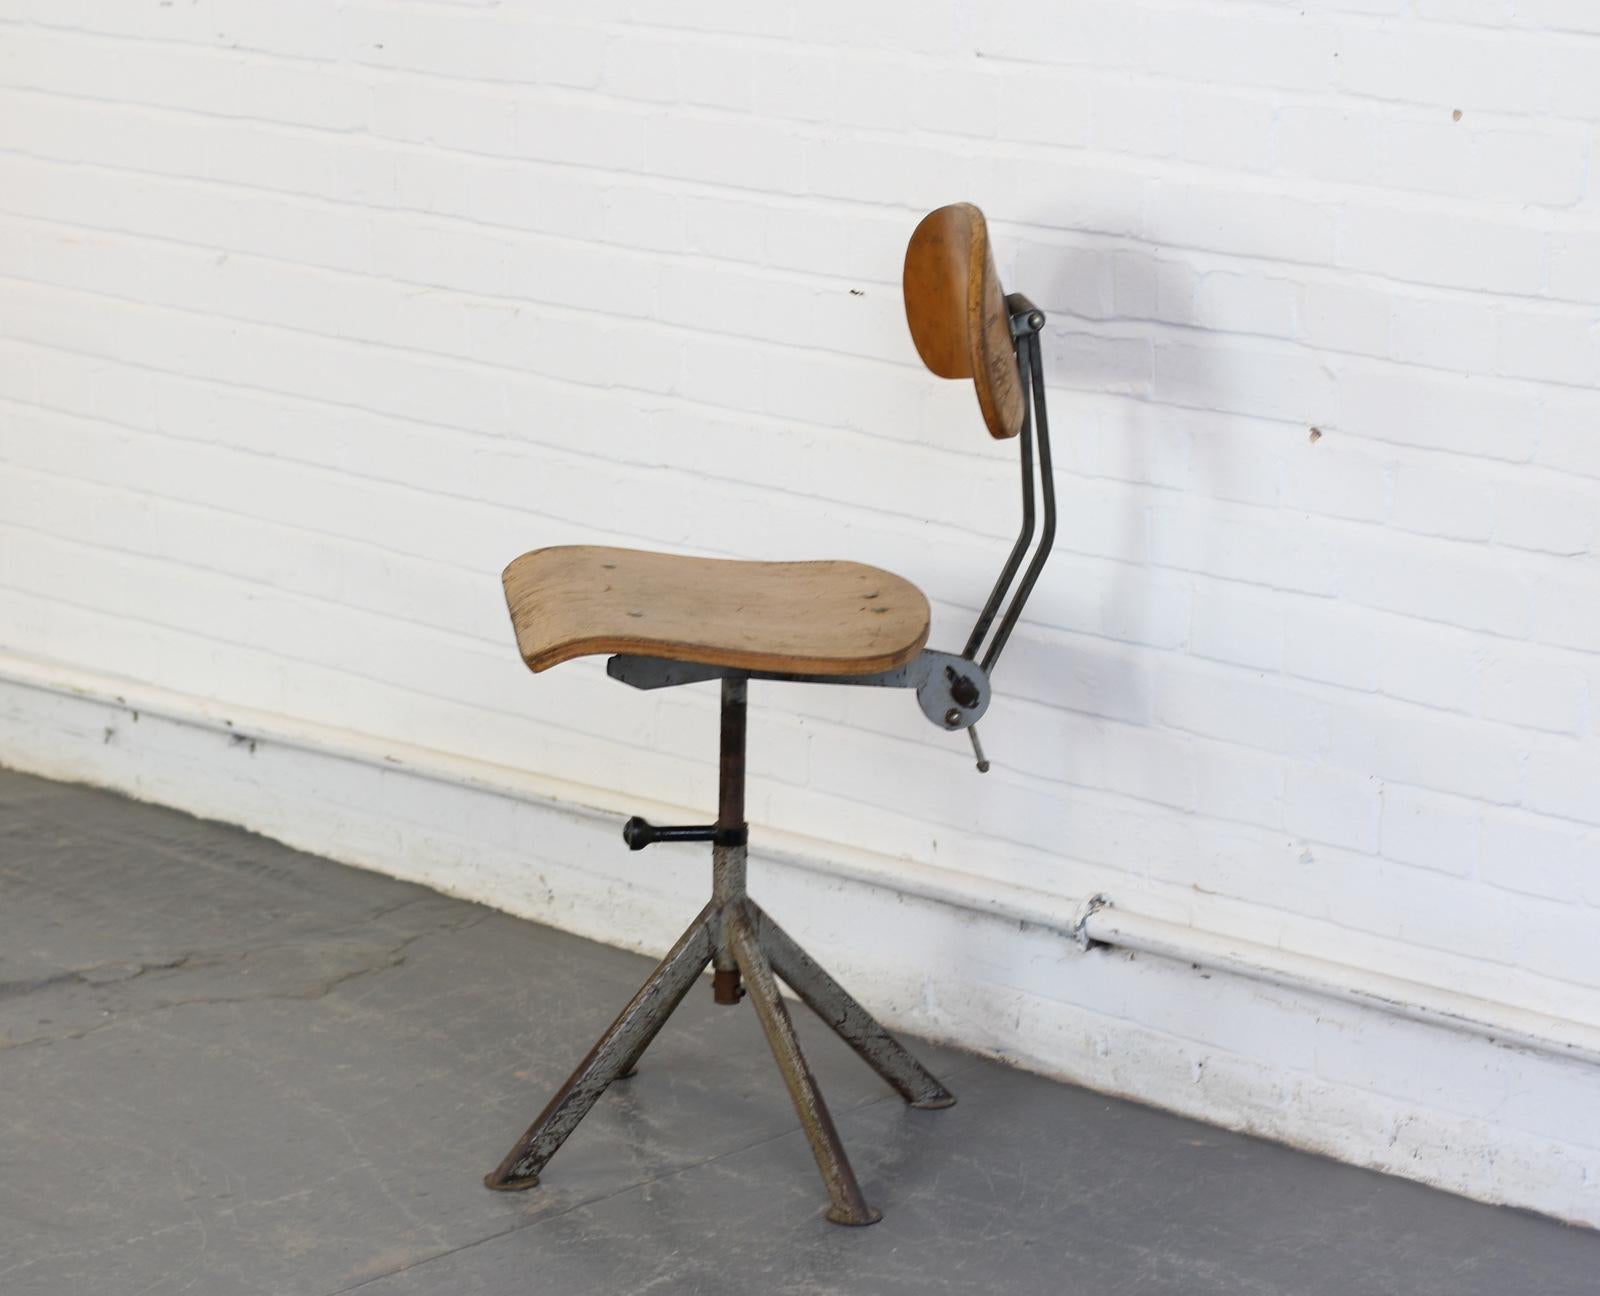 Architects chair by Odelberg & Olson, circa 1940s.

- Thick shaped ply seat and back rest
- Fully adjustable
- Original distributors label
- Attributed to Elias Svedberg
- Swedish, circa 1940s.
- Measures: 41 cm wide x 50 cm deep x 55 cm from